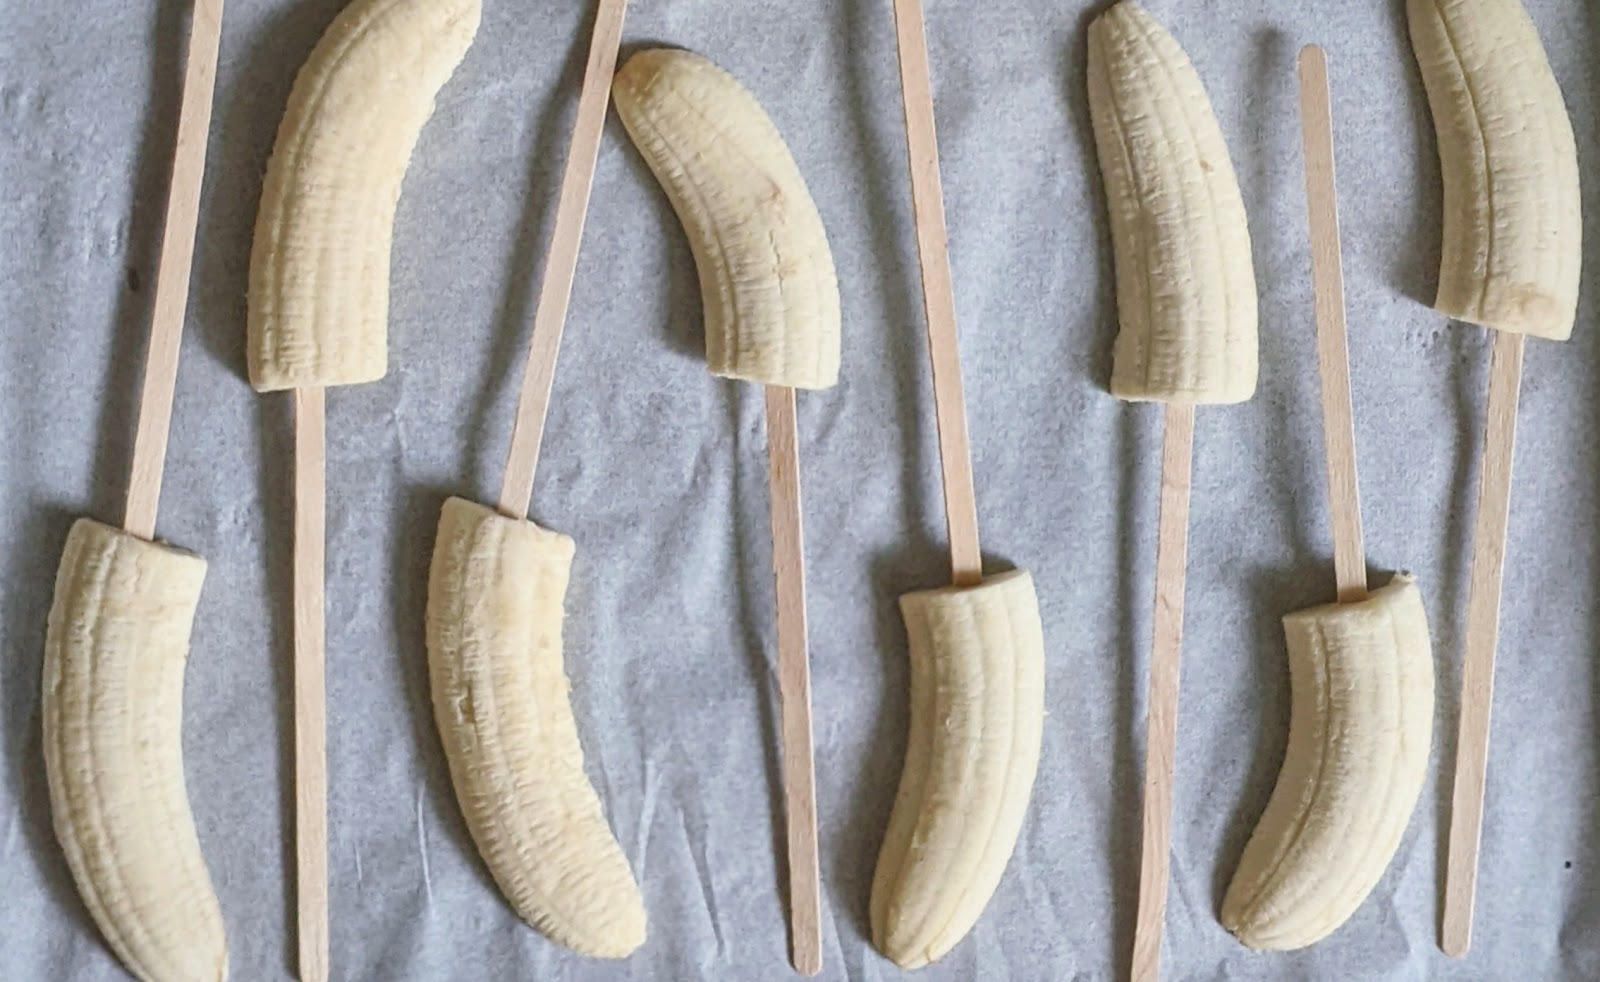 top down view of sliced bananas with wooden sticks inserted into them laying on a baking tray with parchment paper